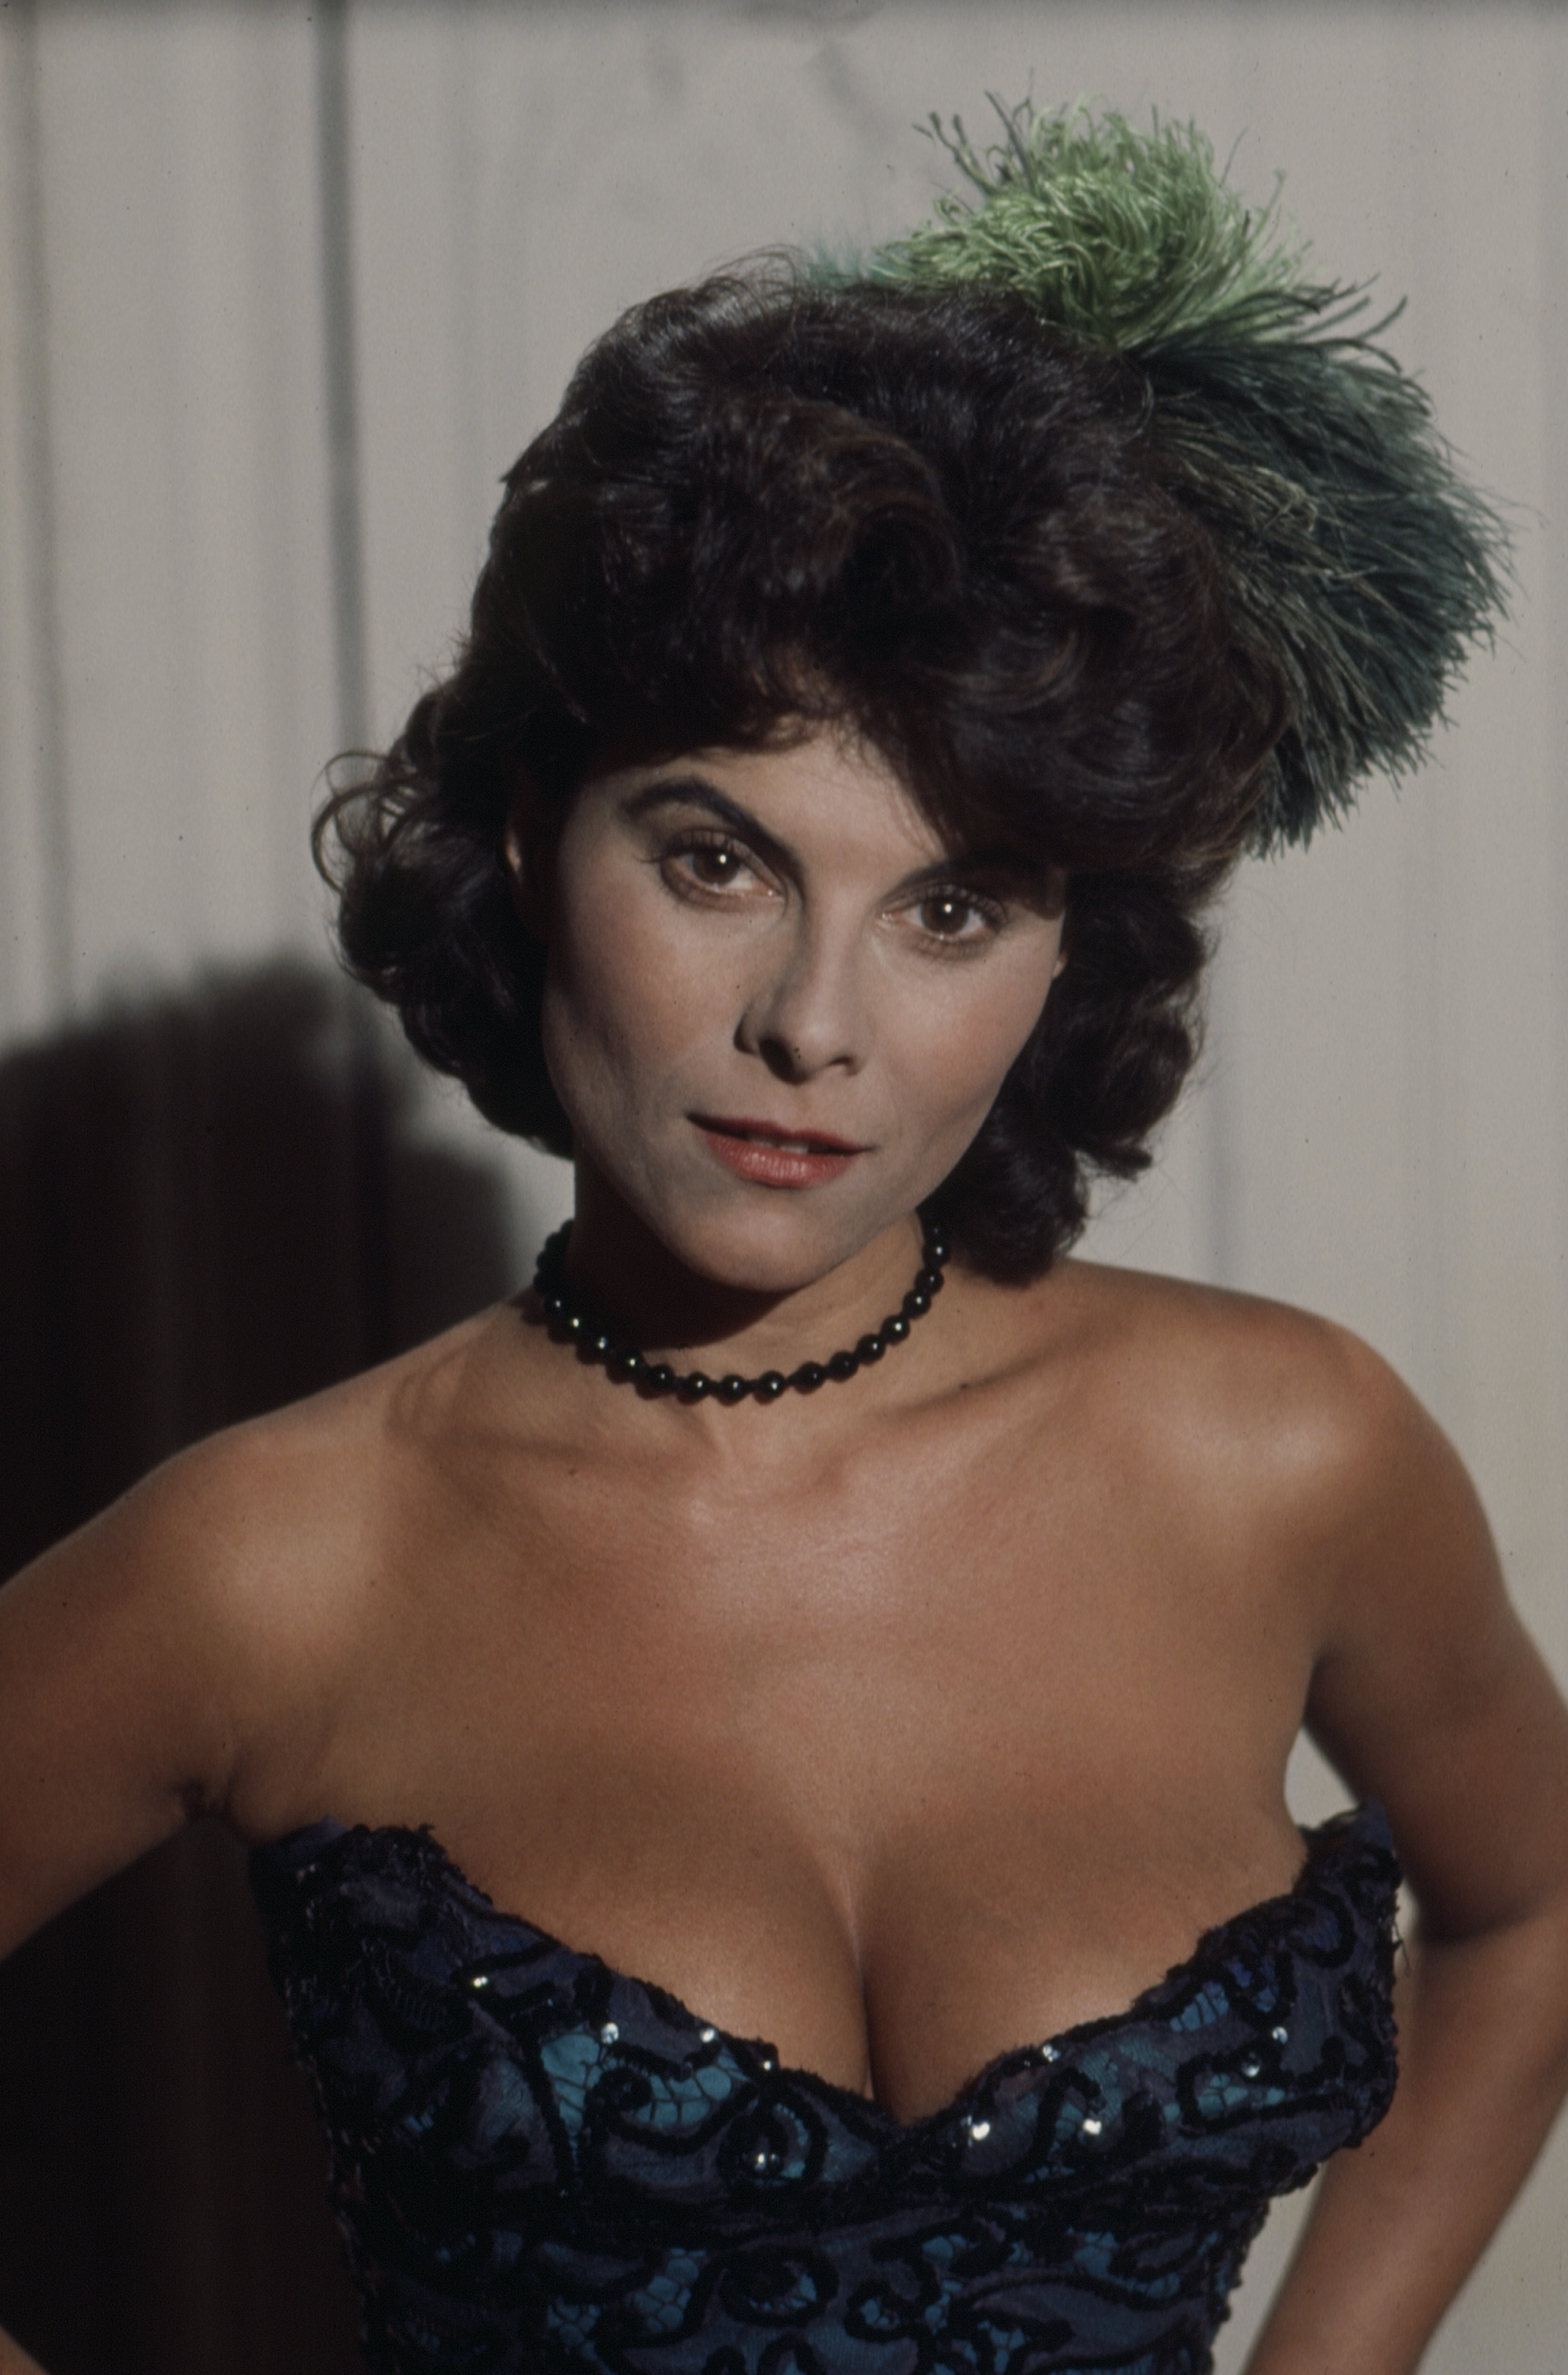 Adrienne Barbeau in Los Angeles in 1976 | Source: Getty Images